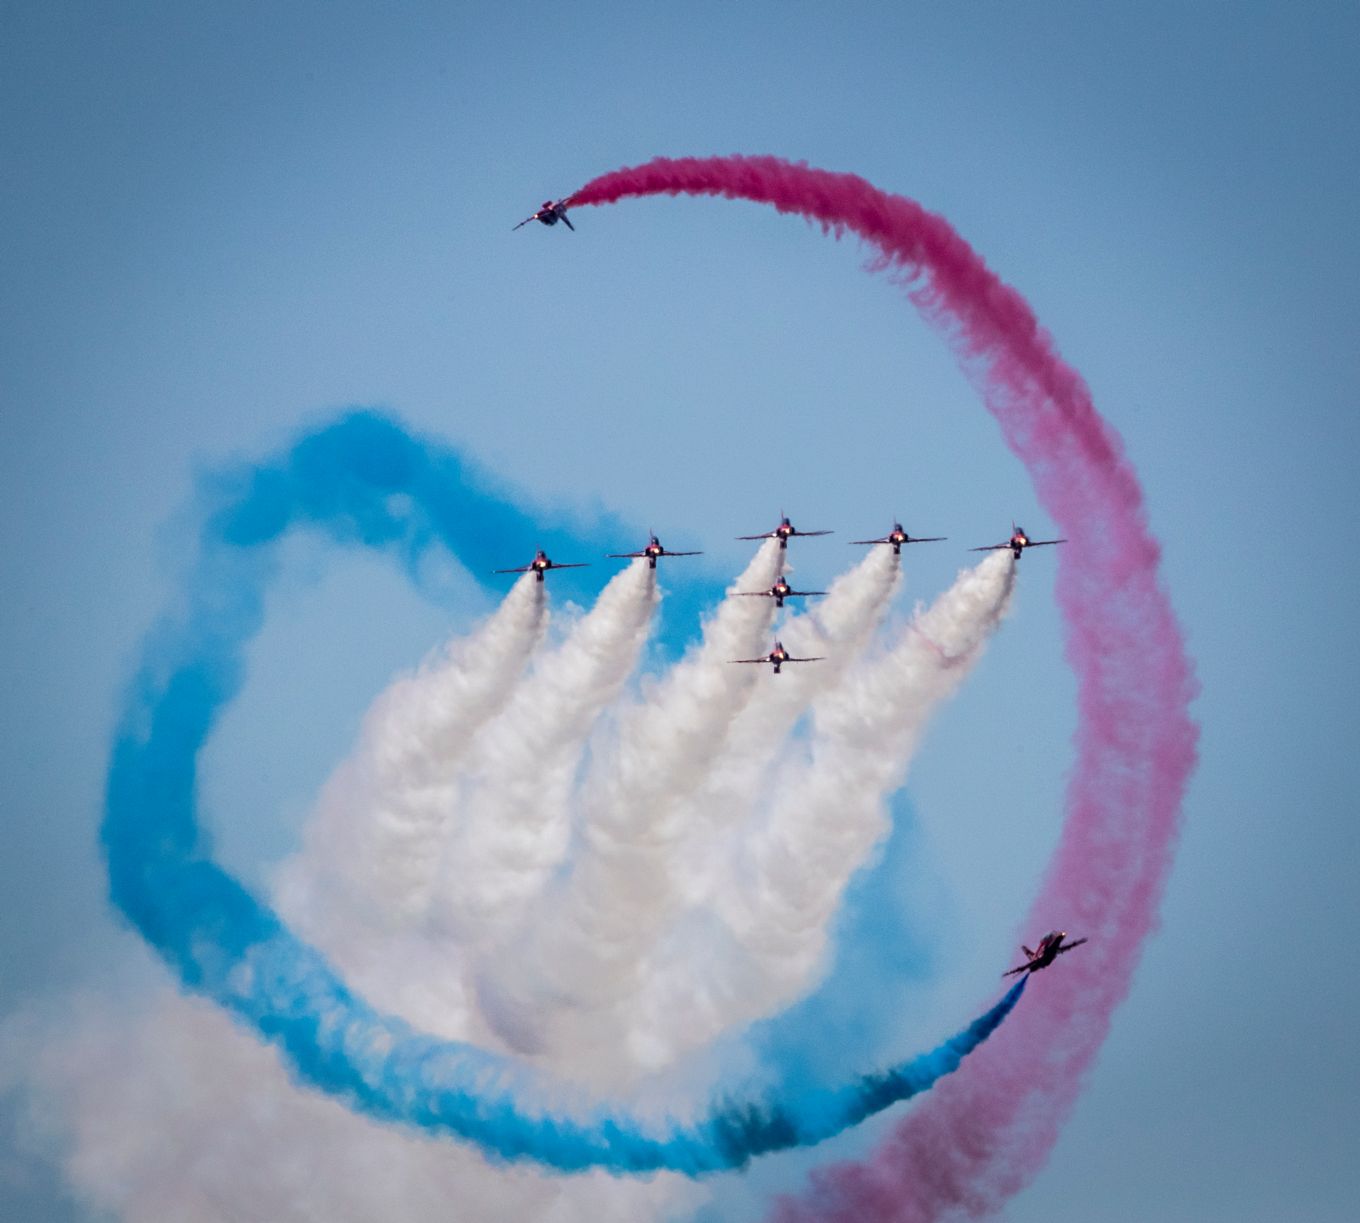 The Red Arrows at RAF Wittering in 2018